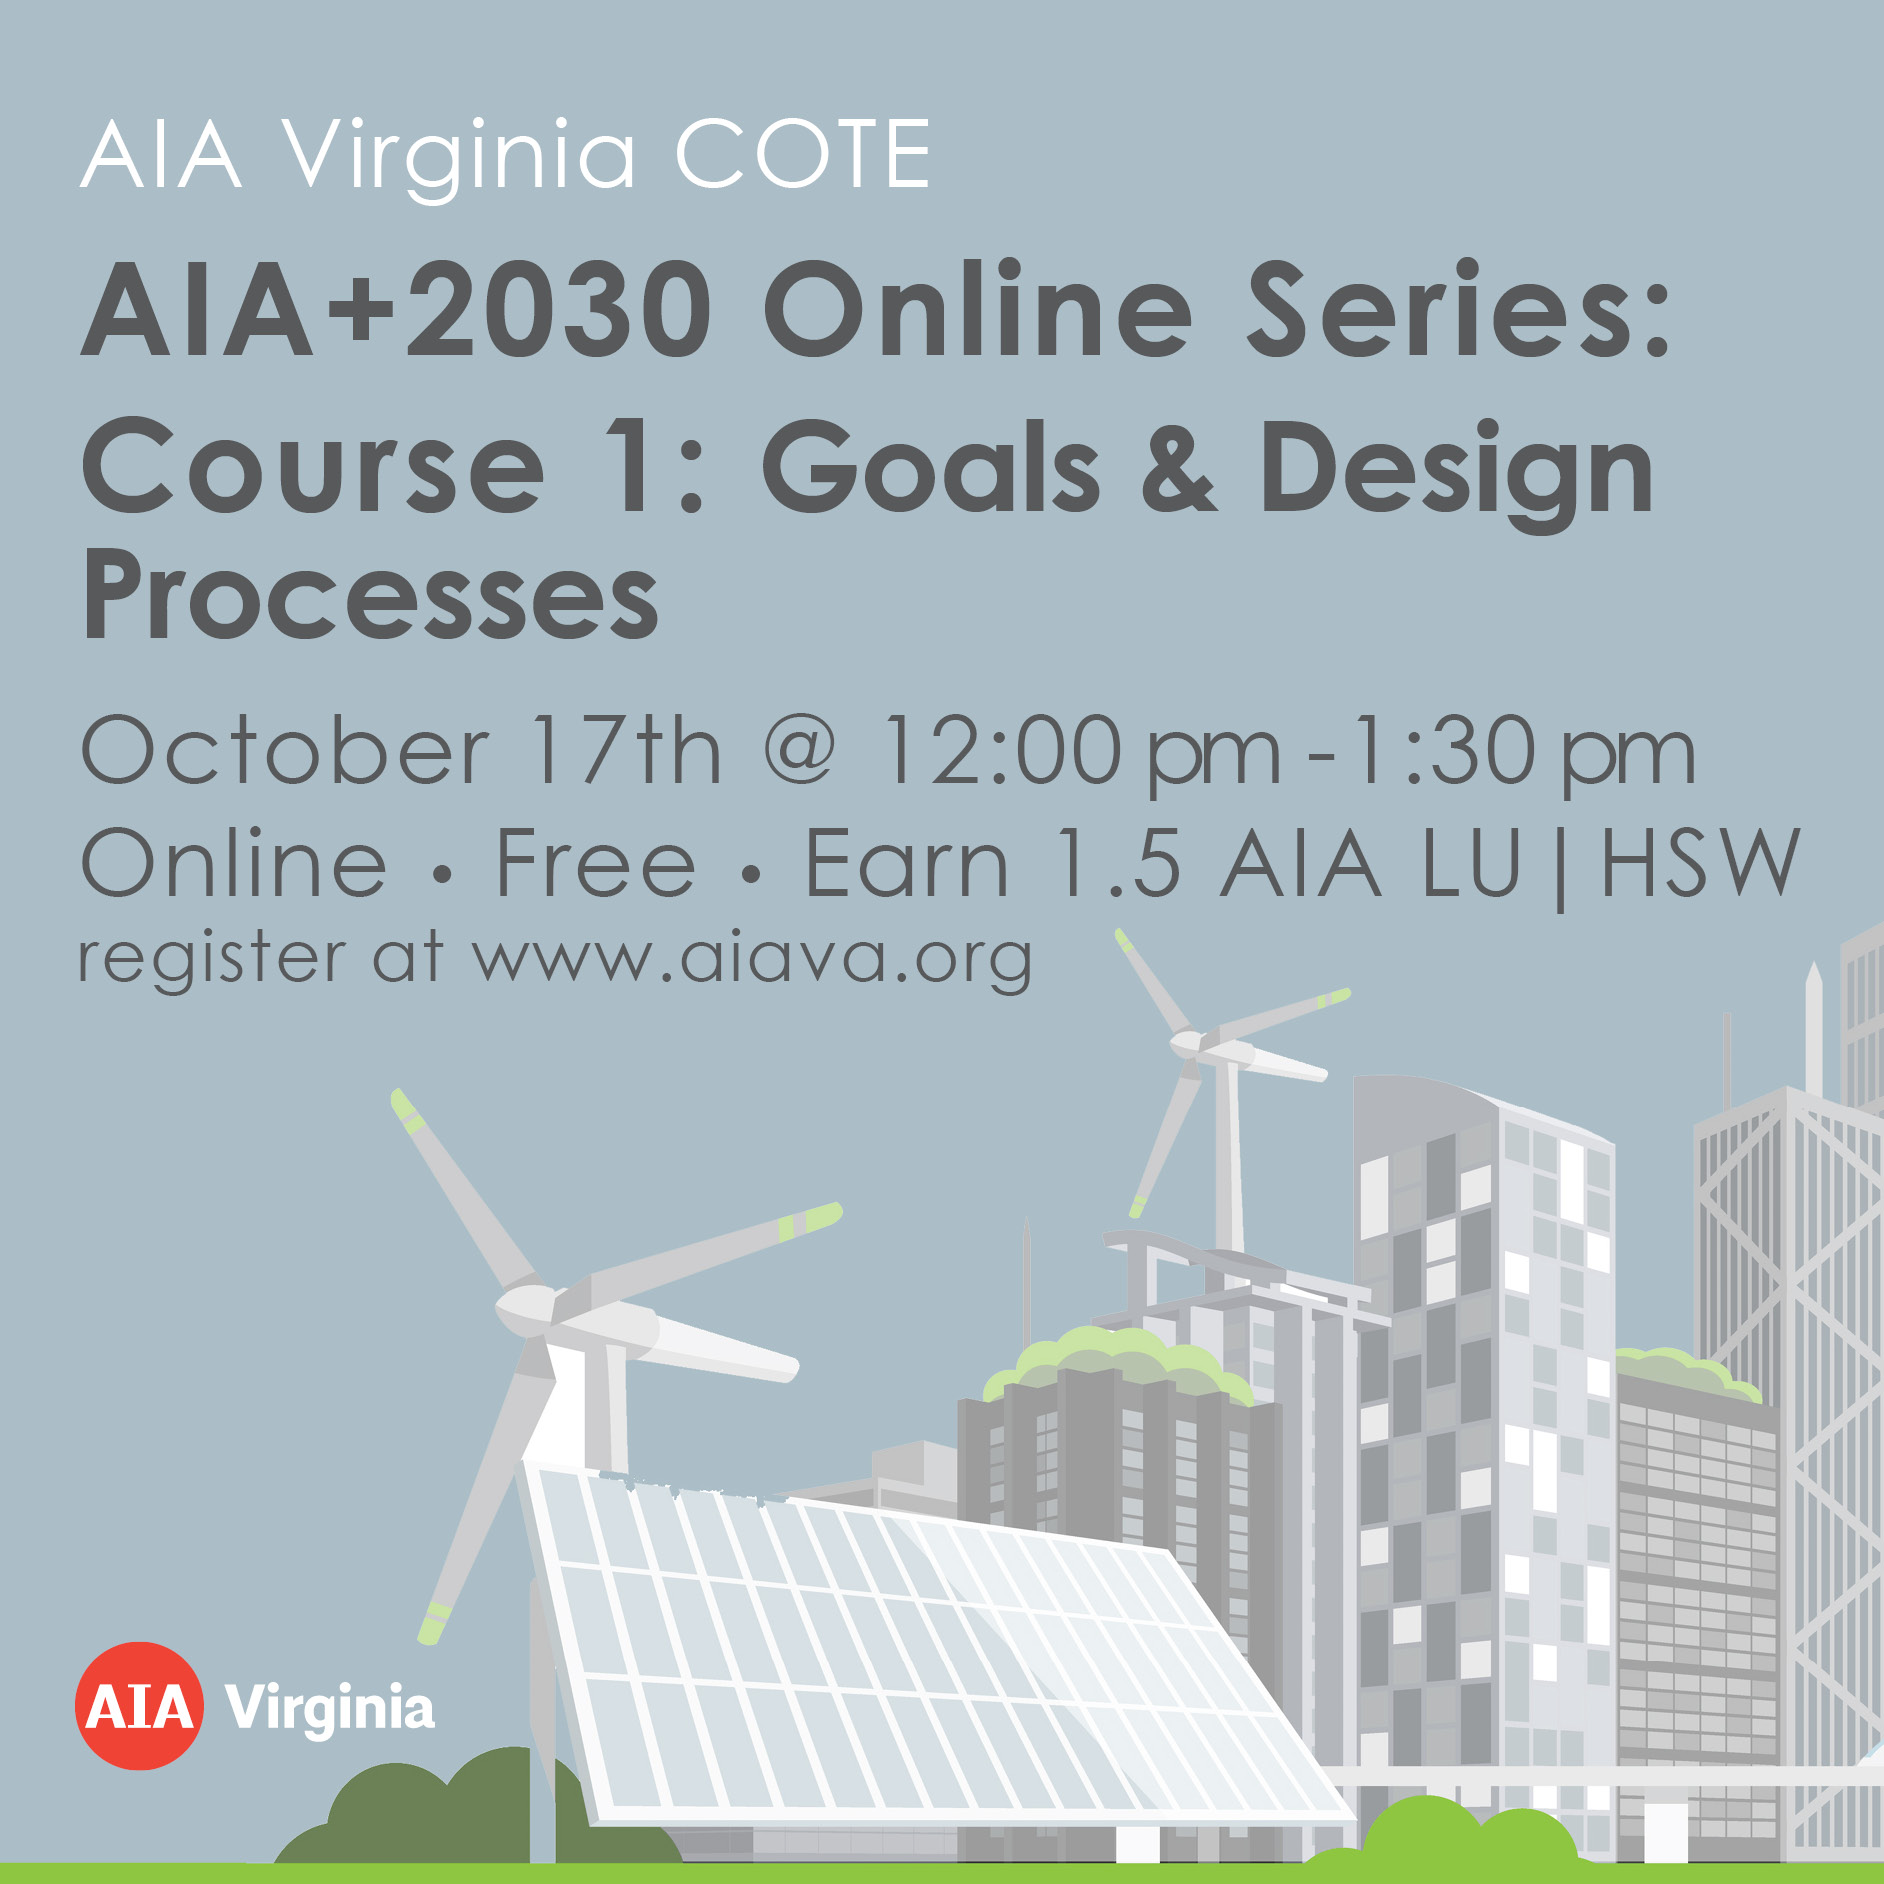 The AIA 2030 Challenge Series